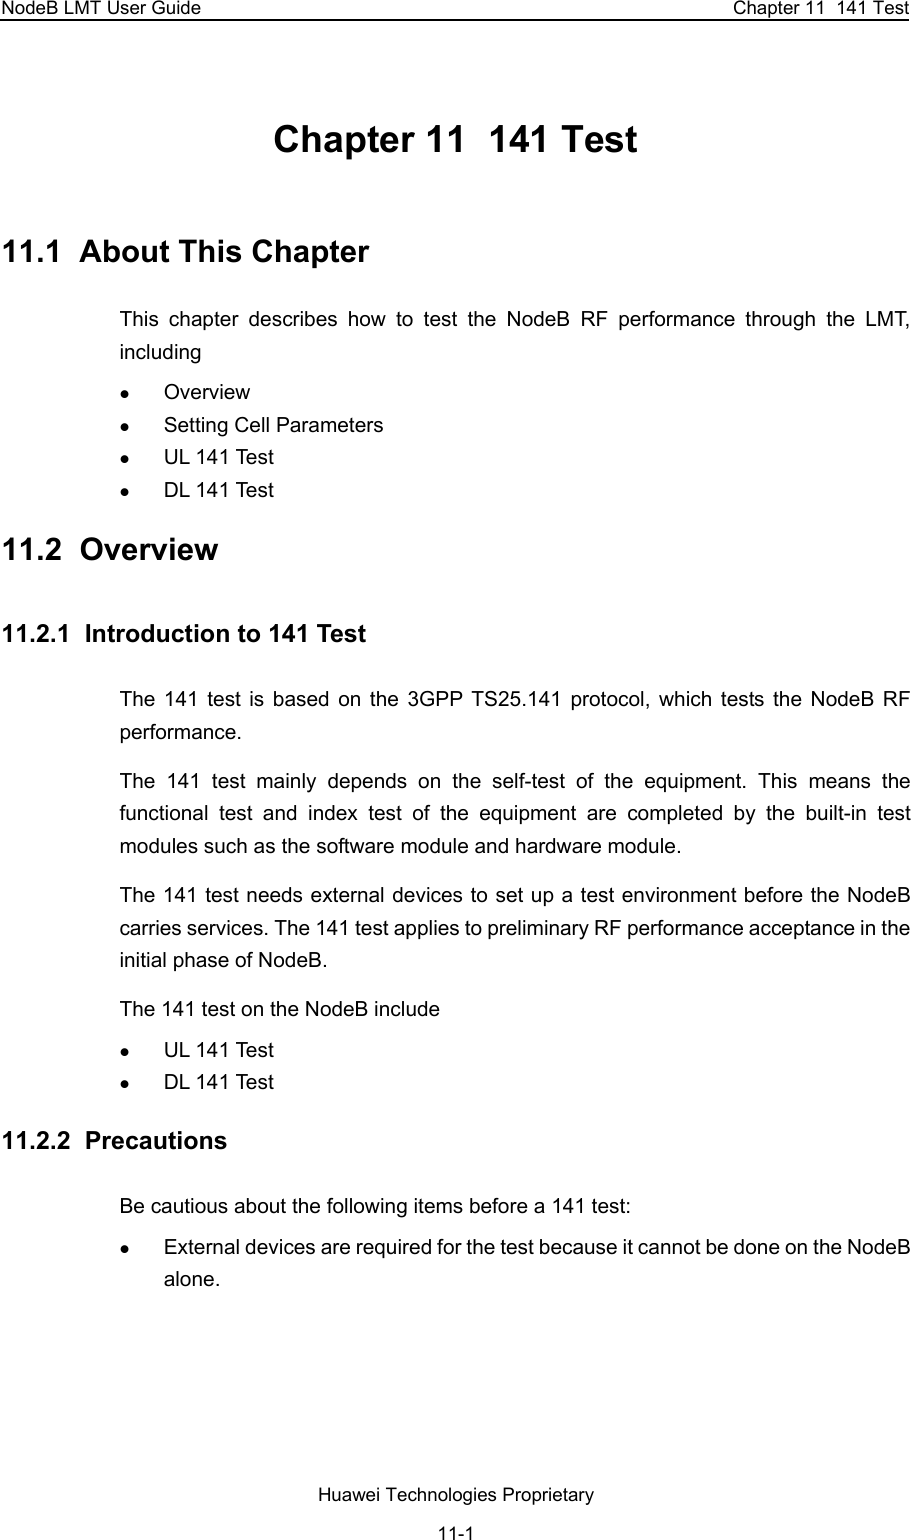 NodeB LMT User Guide  Chapter 11  141 Test Chapter 11  141 Test 11.1  About This Chapter This chapter describes how to test the NodeB RF performance through the LMT, including  z Overview z Setting Cell Parameters z UL 141 Test z DL 141 Test 11.2  Overview 11.2.1  Introduction to 141 Test The 141 test is based on the 3GPP TS25.141 protocol, which tests the NodeB RF performance.  The 141 test mainly depends on the self-test of the equipment. This means the functional test and index test of the equipment are completed by the built-in test modules such as the software module and hardware module.  The 141 test needs external devices to set up a test environment before the NodeB carries services. The 141 test applies to preliminary RF performance acceptance in the initial phase of NodeB.  The 141 test on the NodeB include z UL 141 Test z DL 141 Test 11.2.2  Precautions  Be cautious about the following items before a 141 test: z External devices are required for the test because it cannot be done on the NodeB alone.   Huawei Technologies Proprietary 11-1 